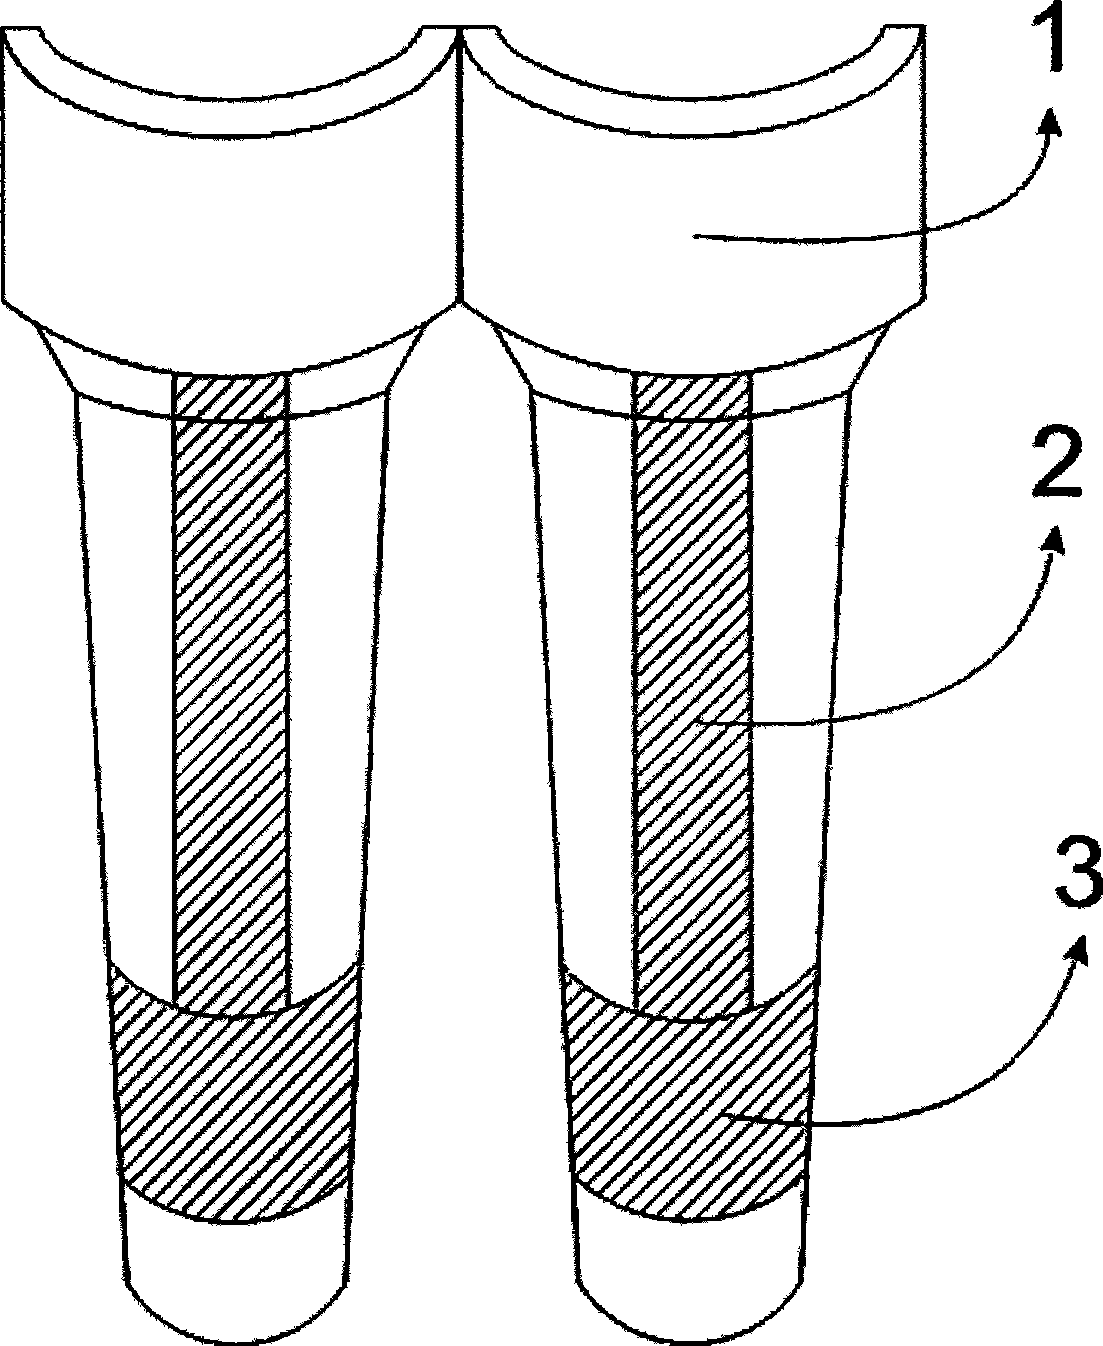 Electrode guiding wire slurry outside an oxygen sensor and manufacturing method thereof